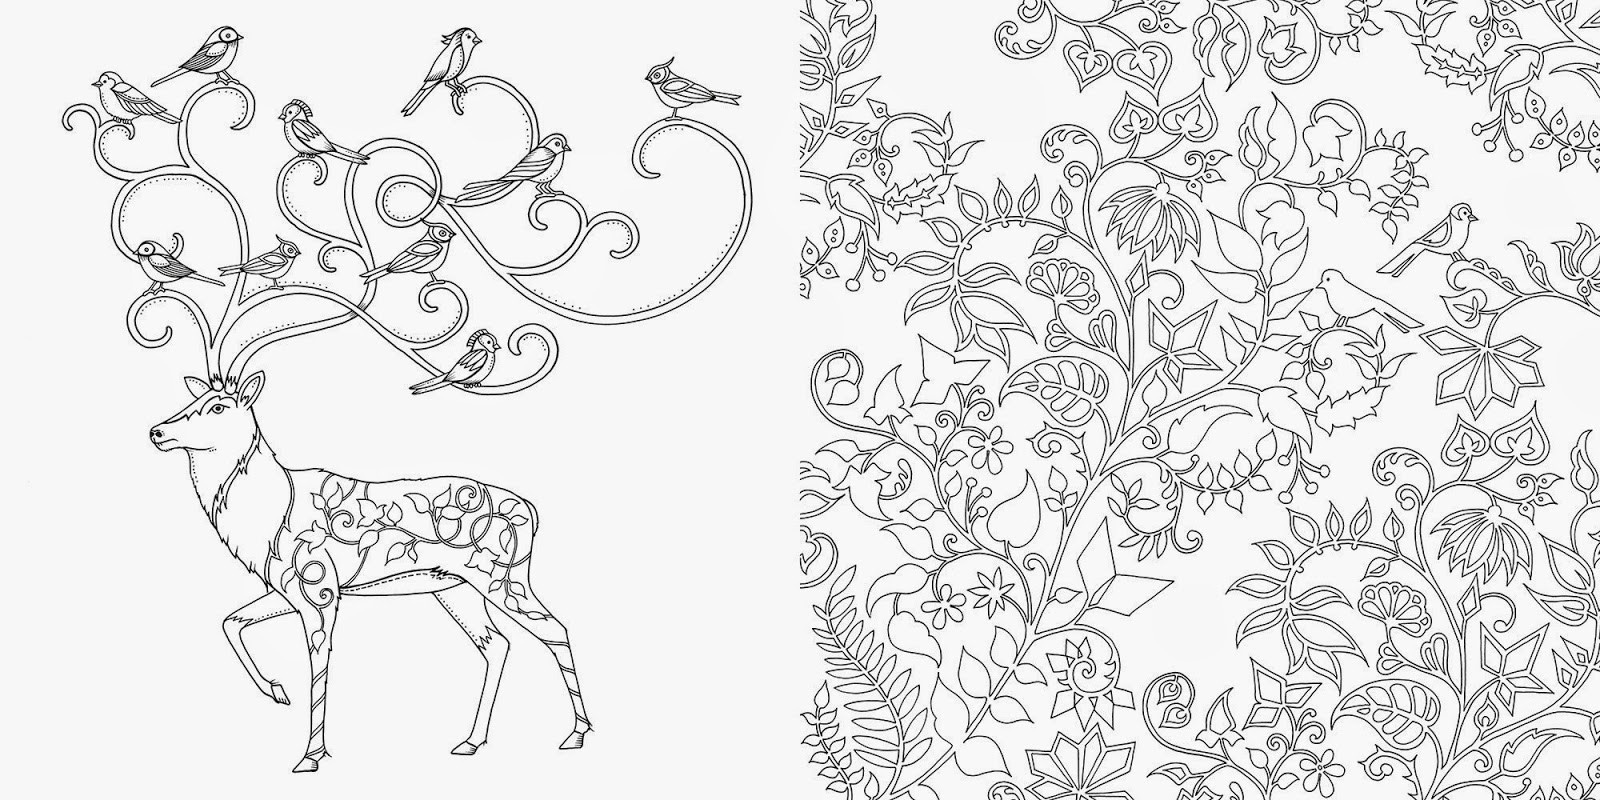 Adult Coloring Books Enchanted Forest
 SurLaLune Fairy Tales Blog Art Thursday Enchanted Forest